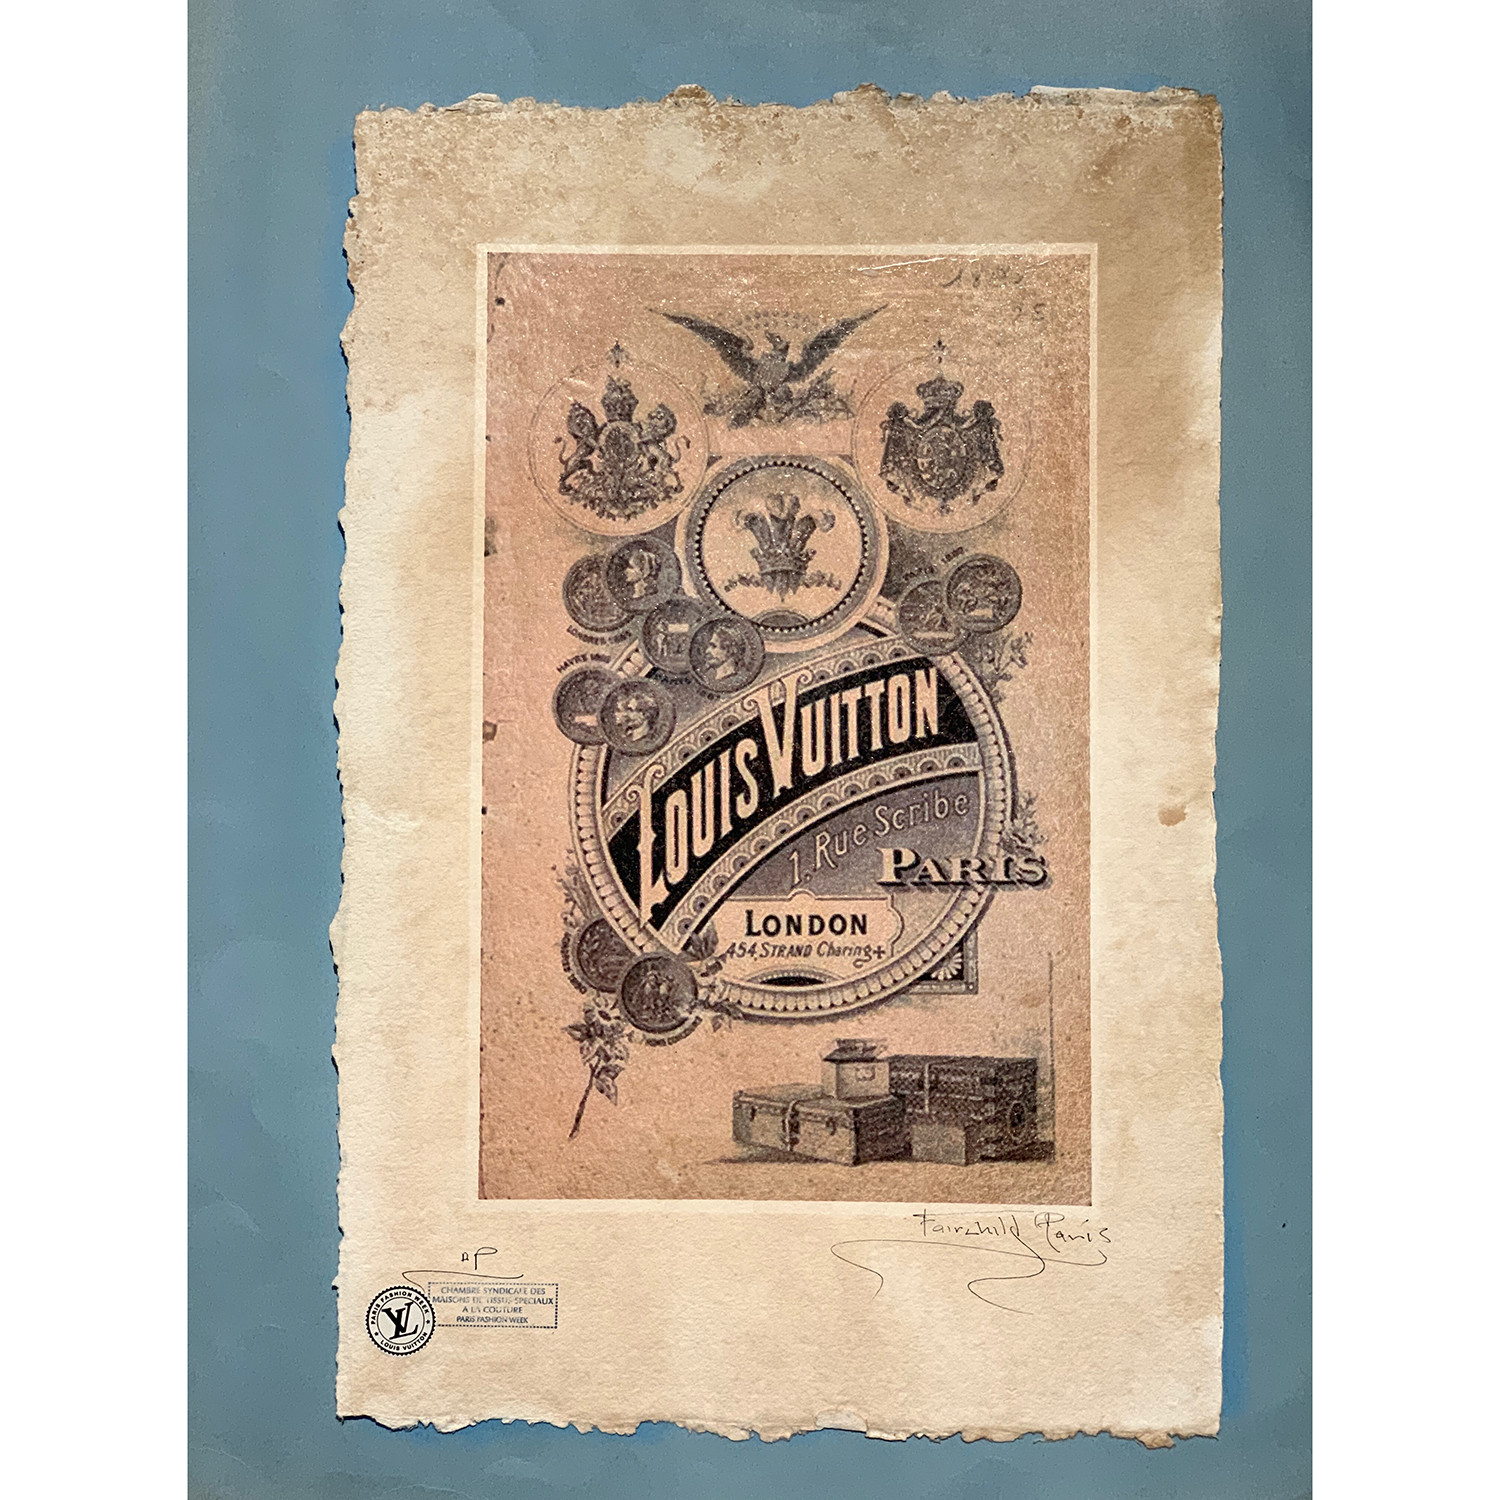 Louis Vuitton product catalogue cover. London 1892. Would love this framed!